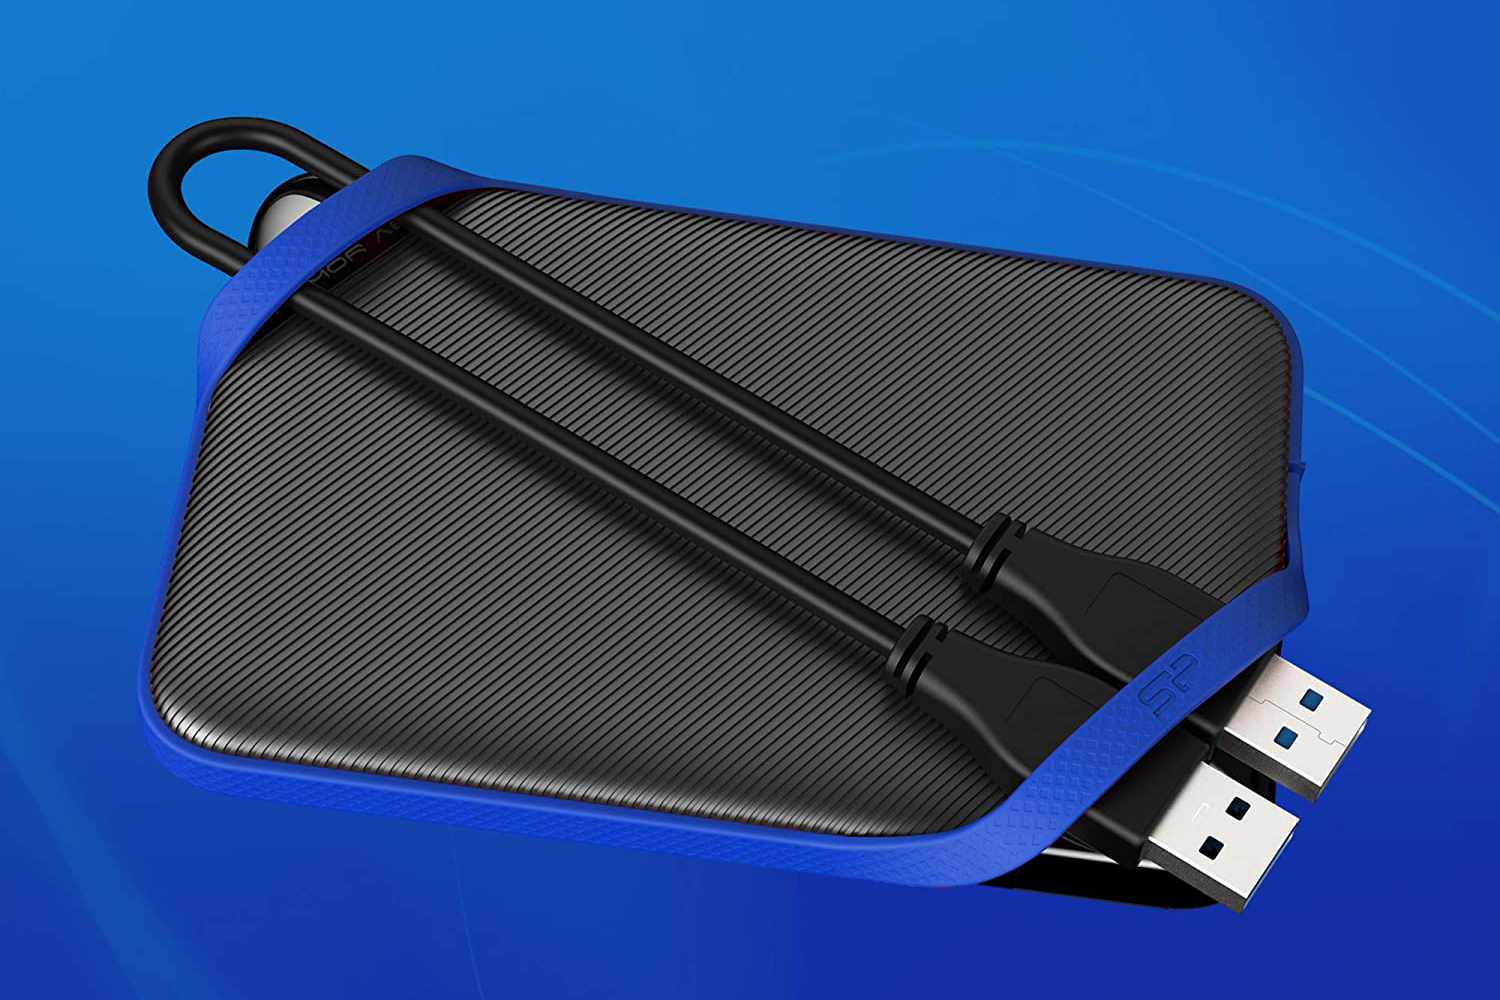 The Best External Hard Drives for the PS4